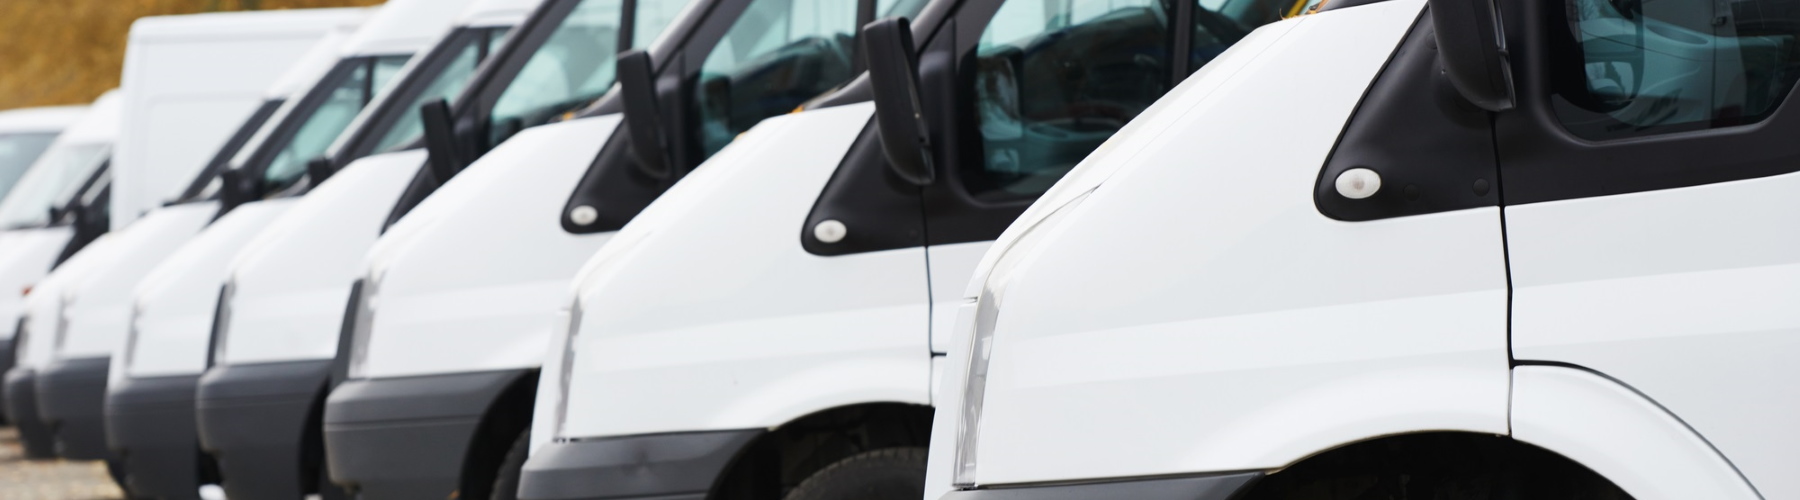 Row of commercial vans representing business insurance